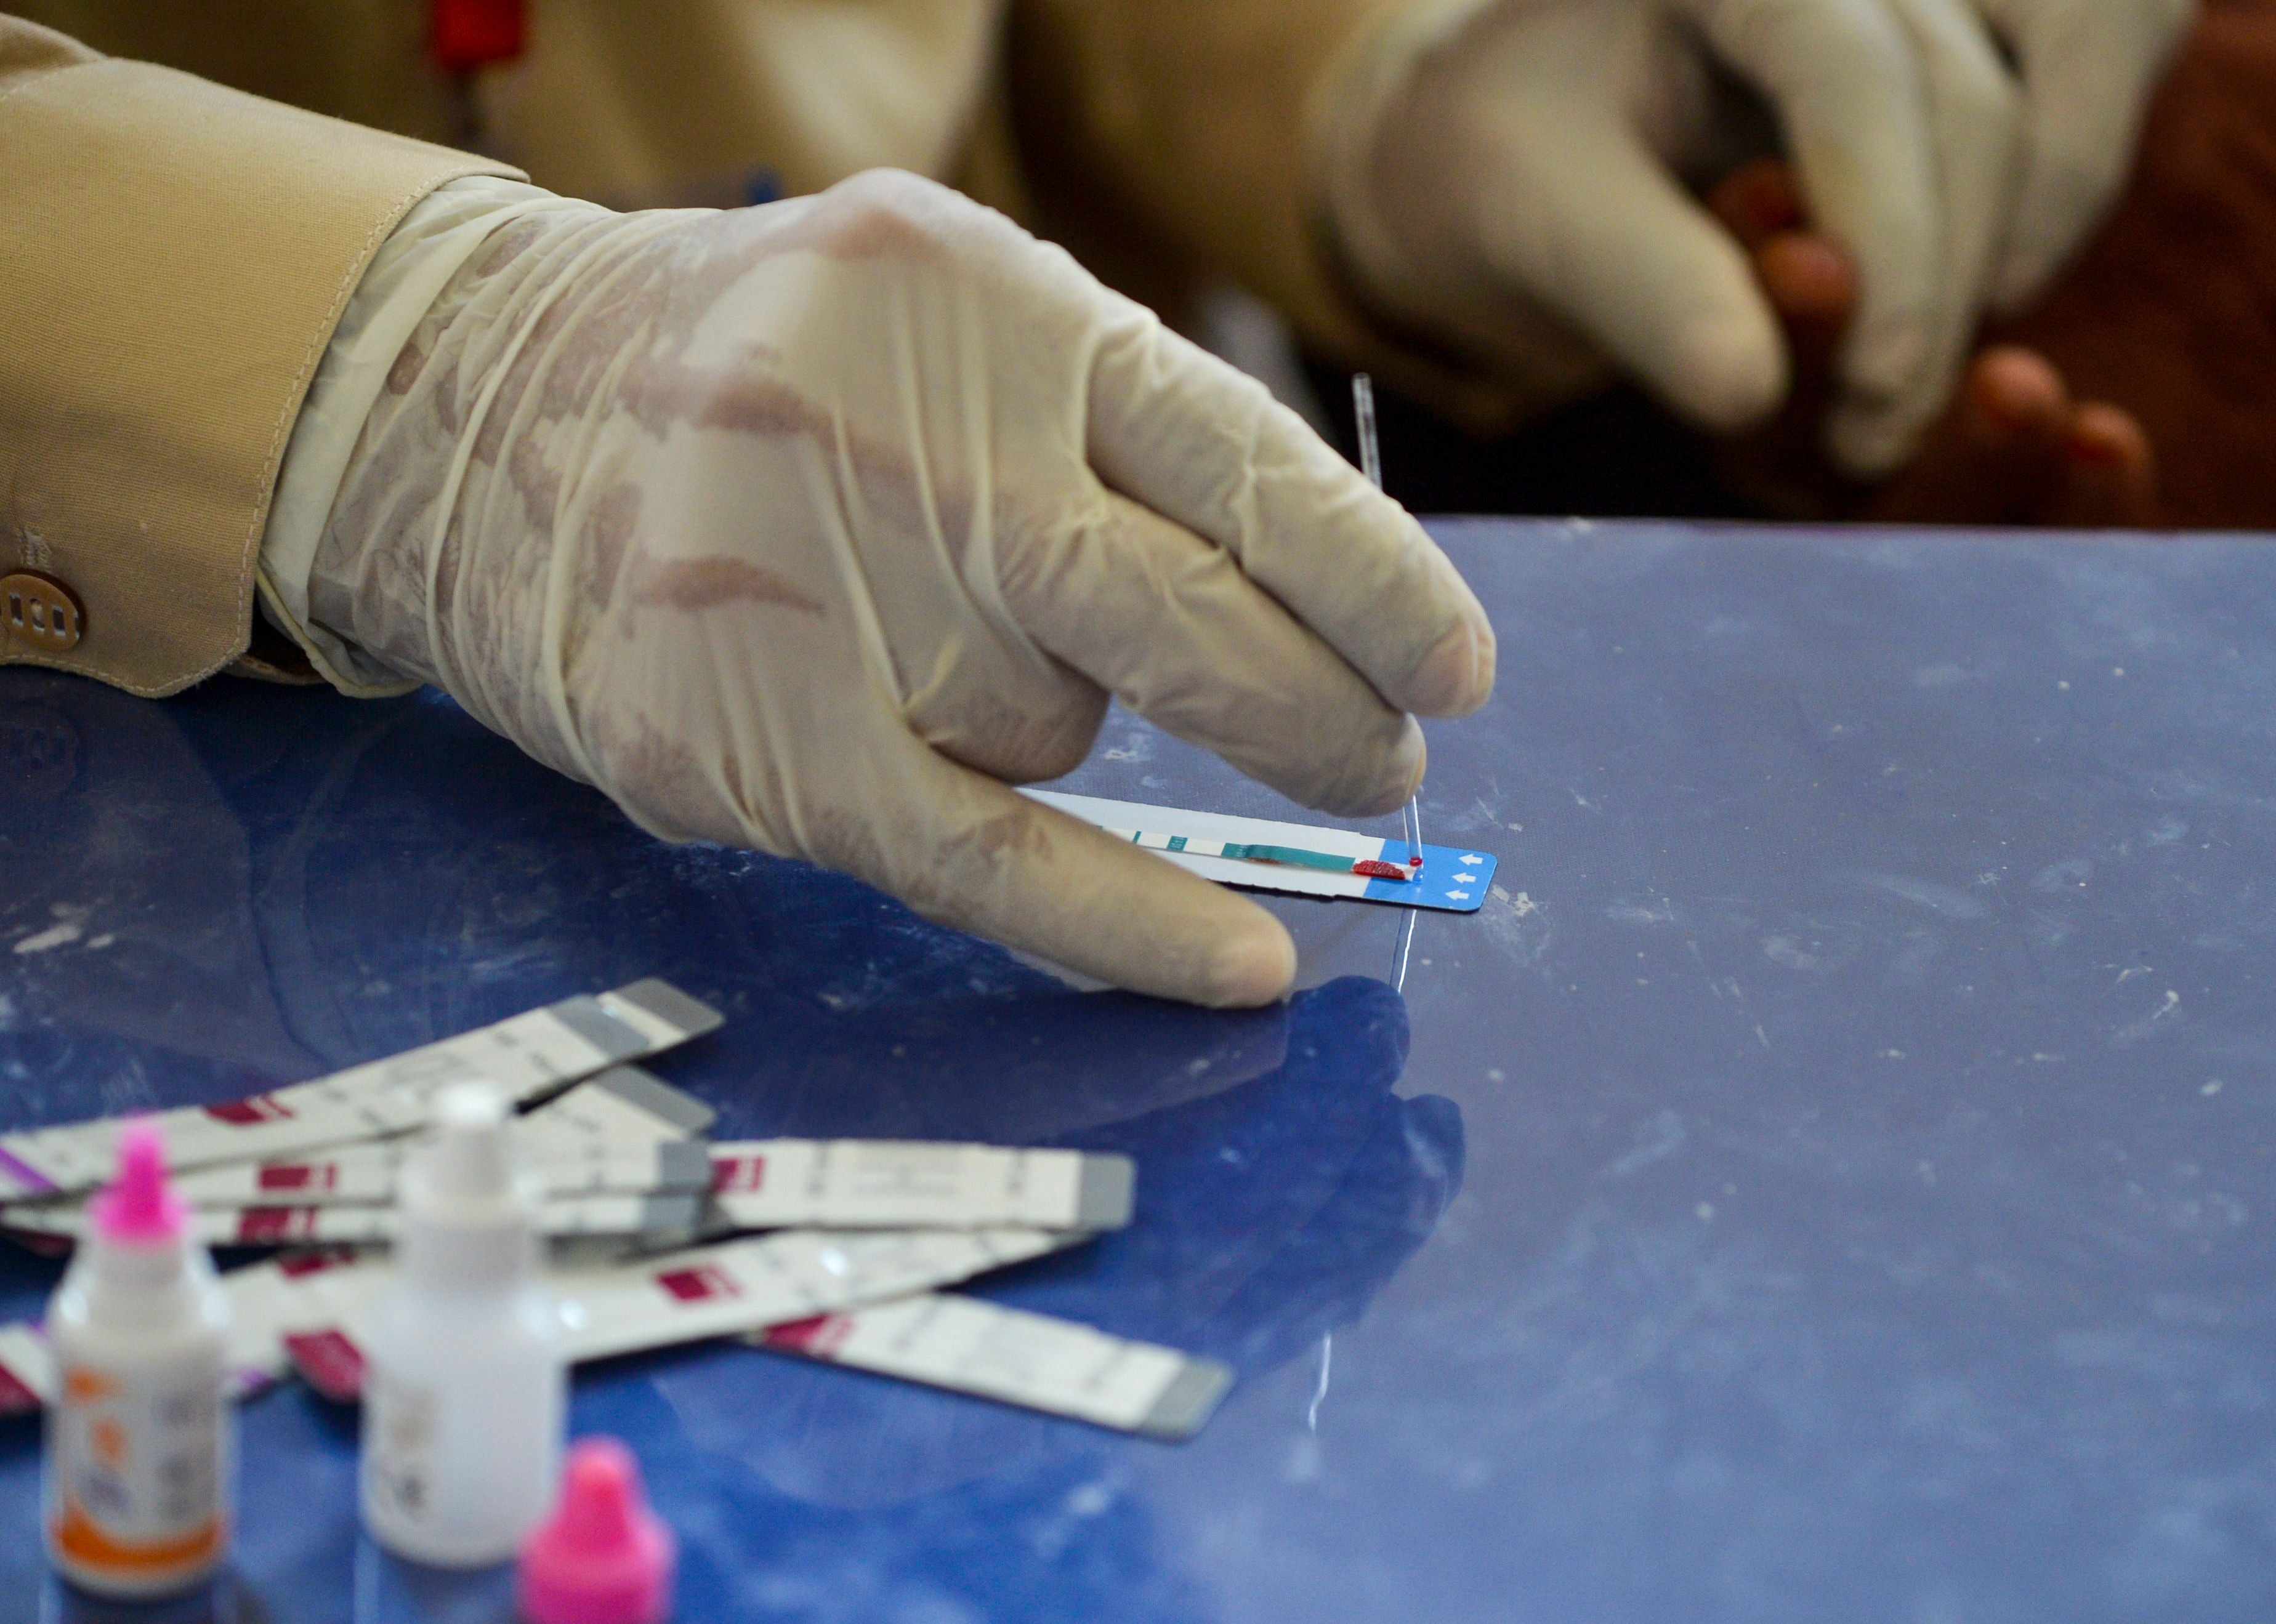 A doctor examines a blood sample taken from a woman during an HIV test